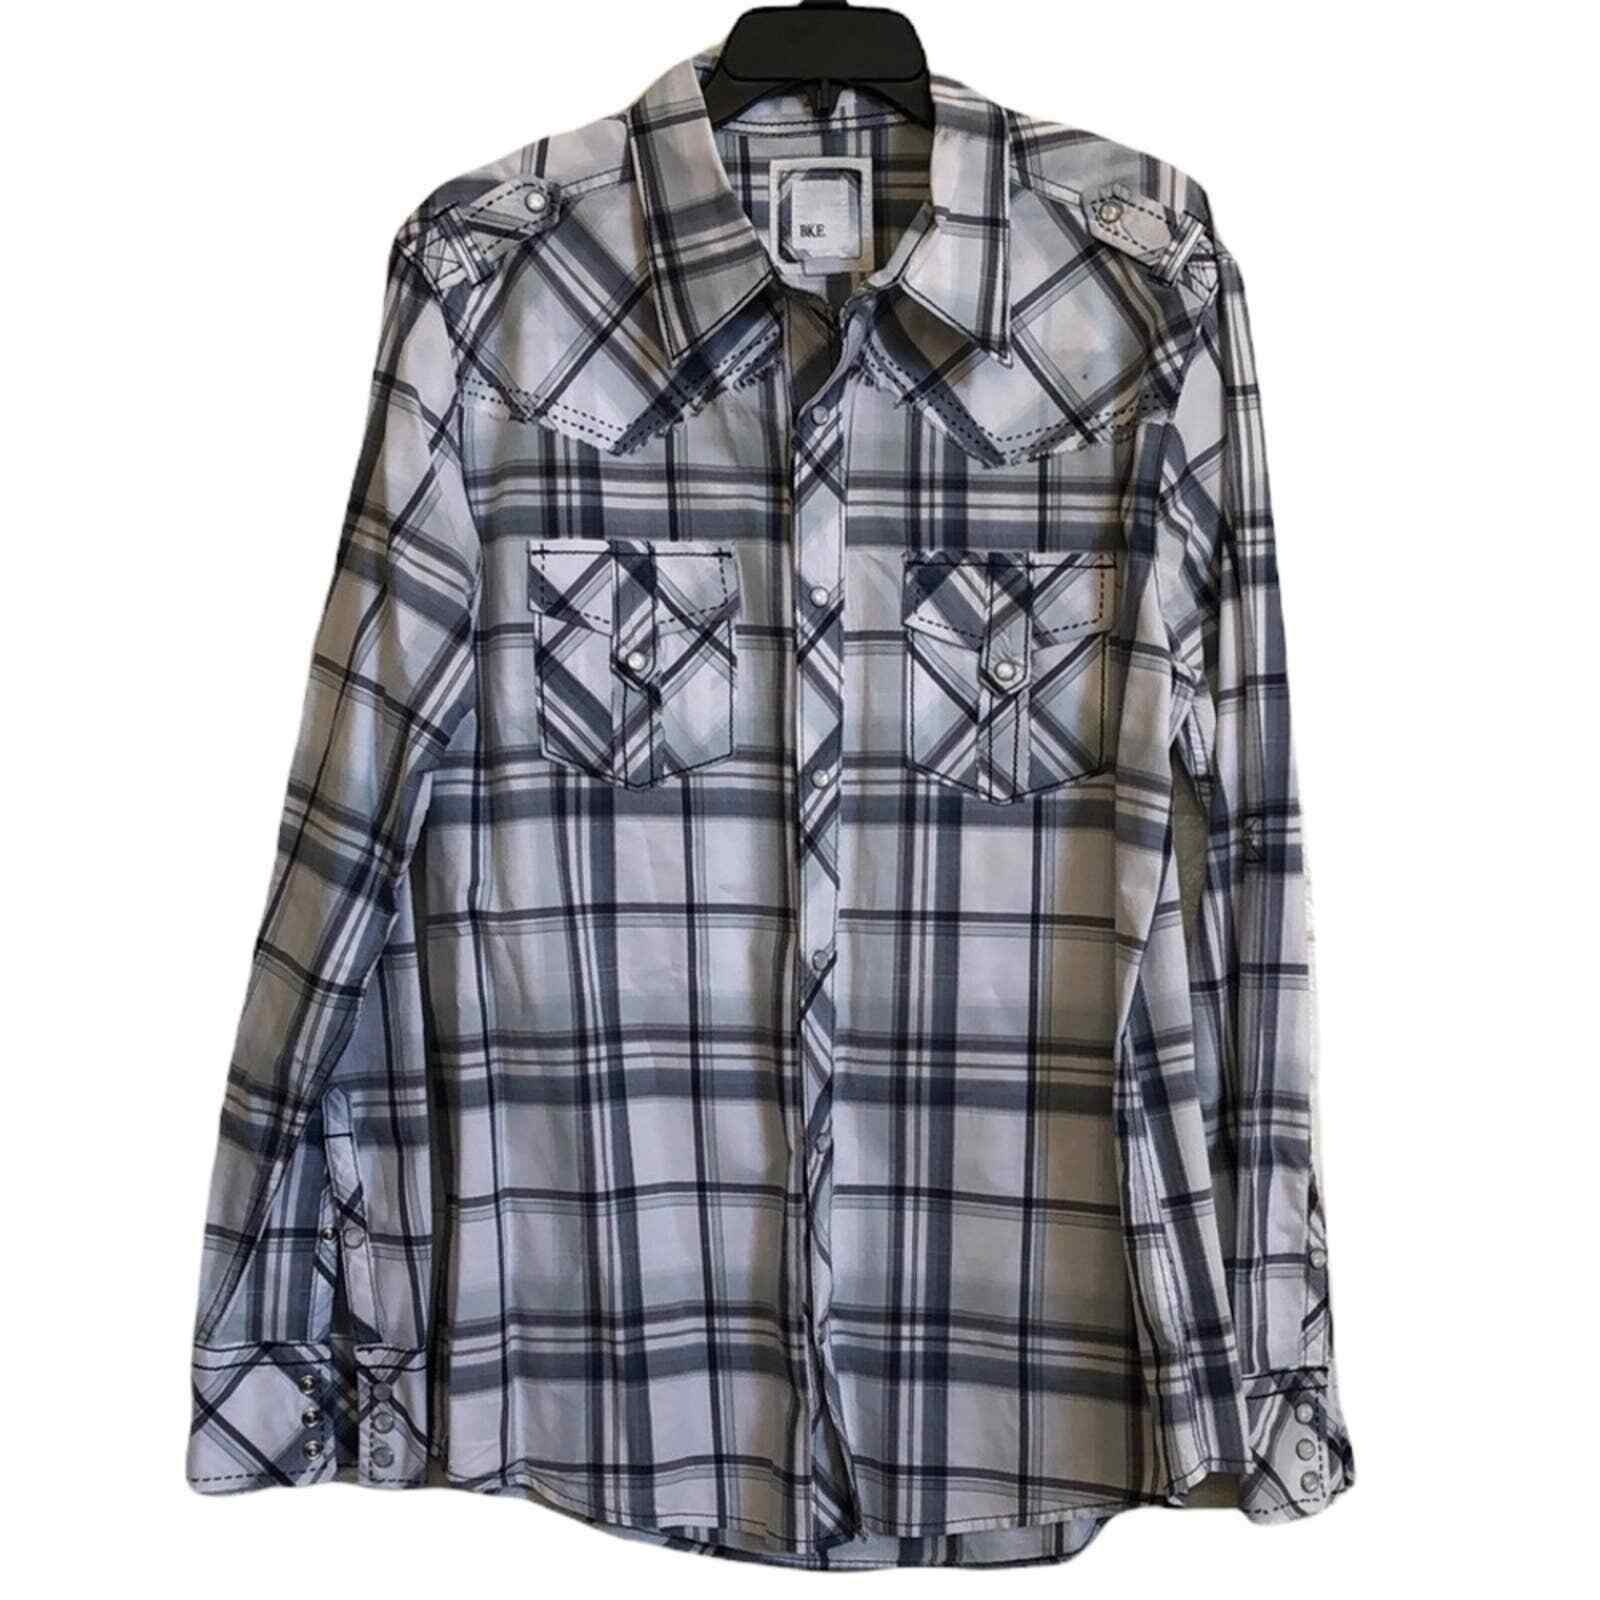 Primary image for BKE by Buckle mens plaid button down with snapback buttons